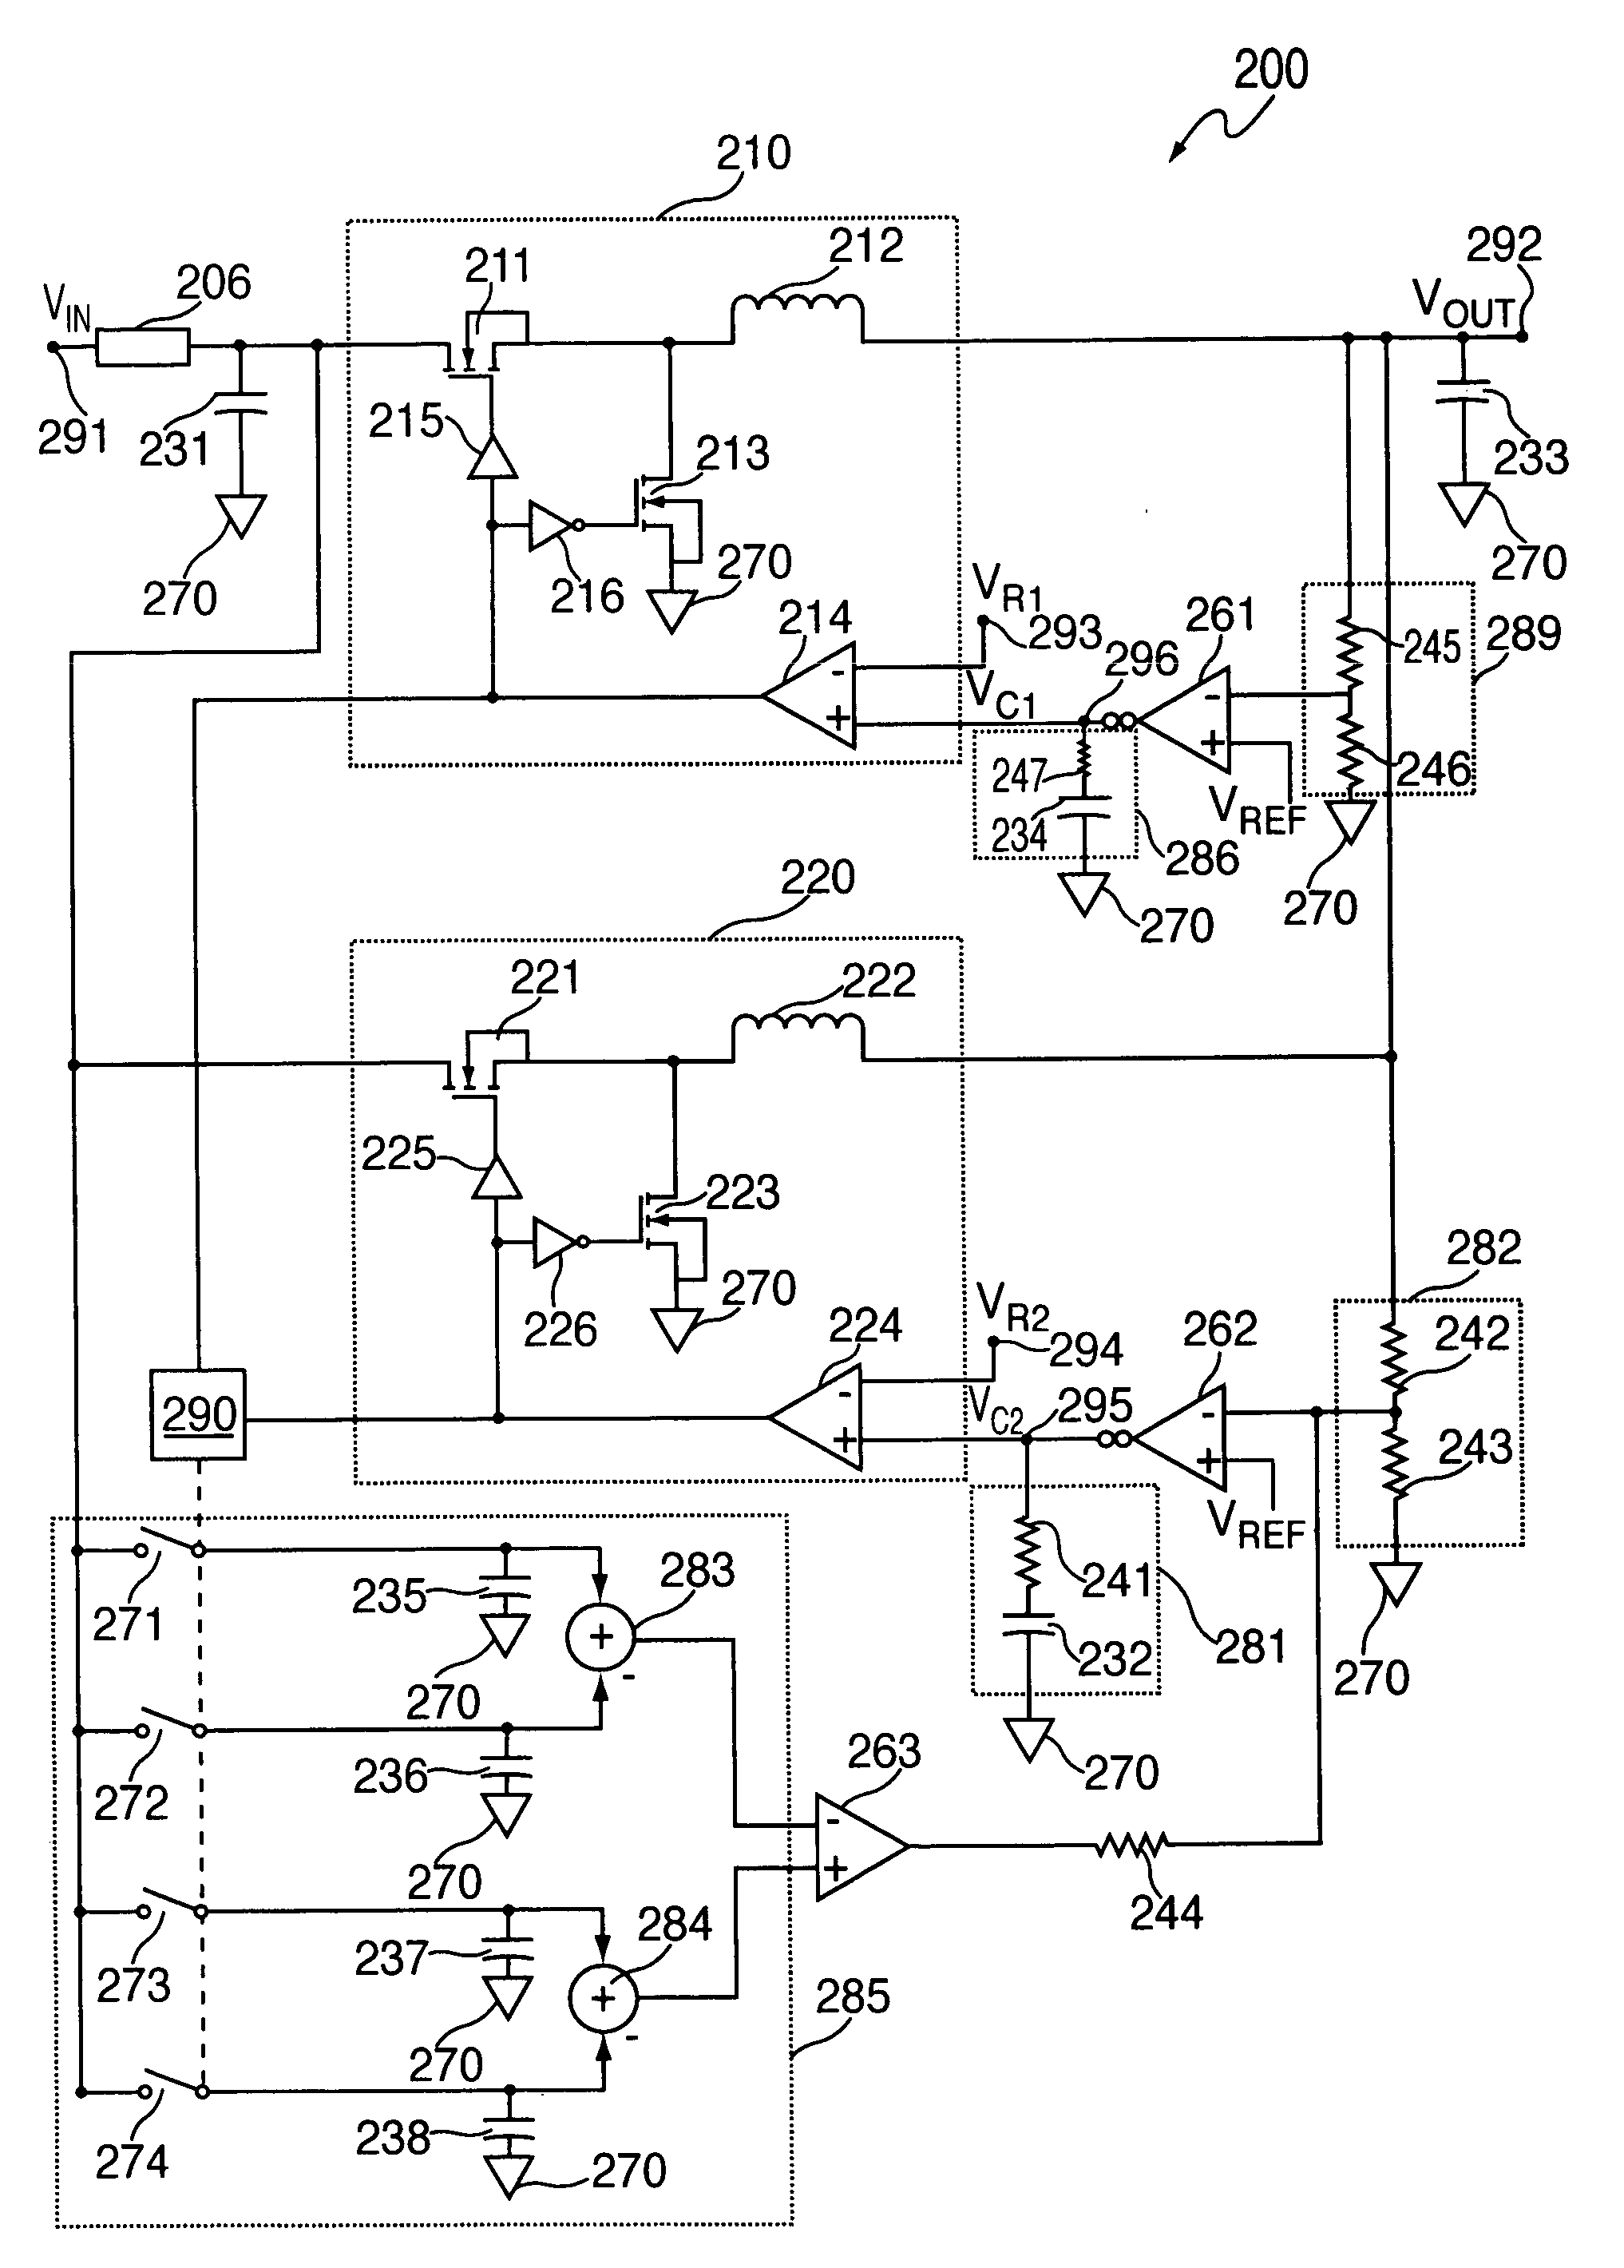 Circuits and methods for providing multiple phase switching regulators which employ the input capacitor voltage signal for current sensing